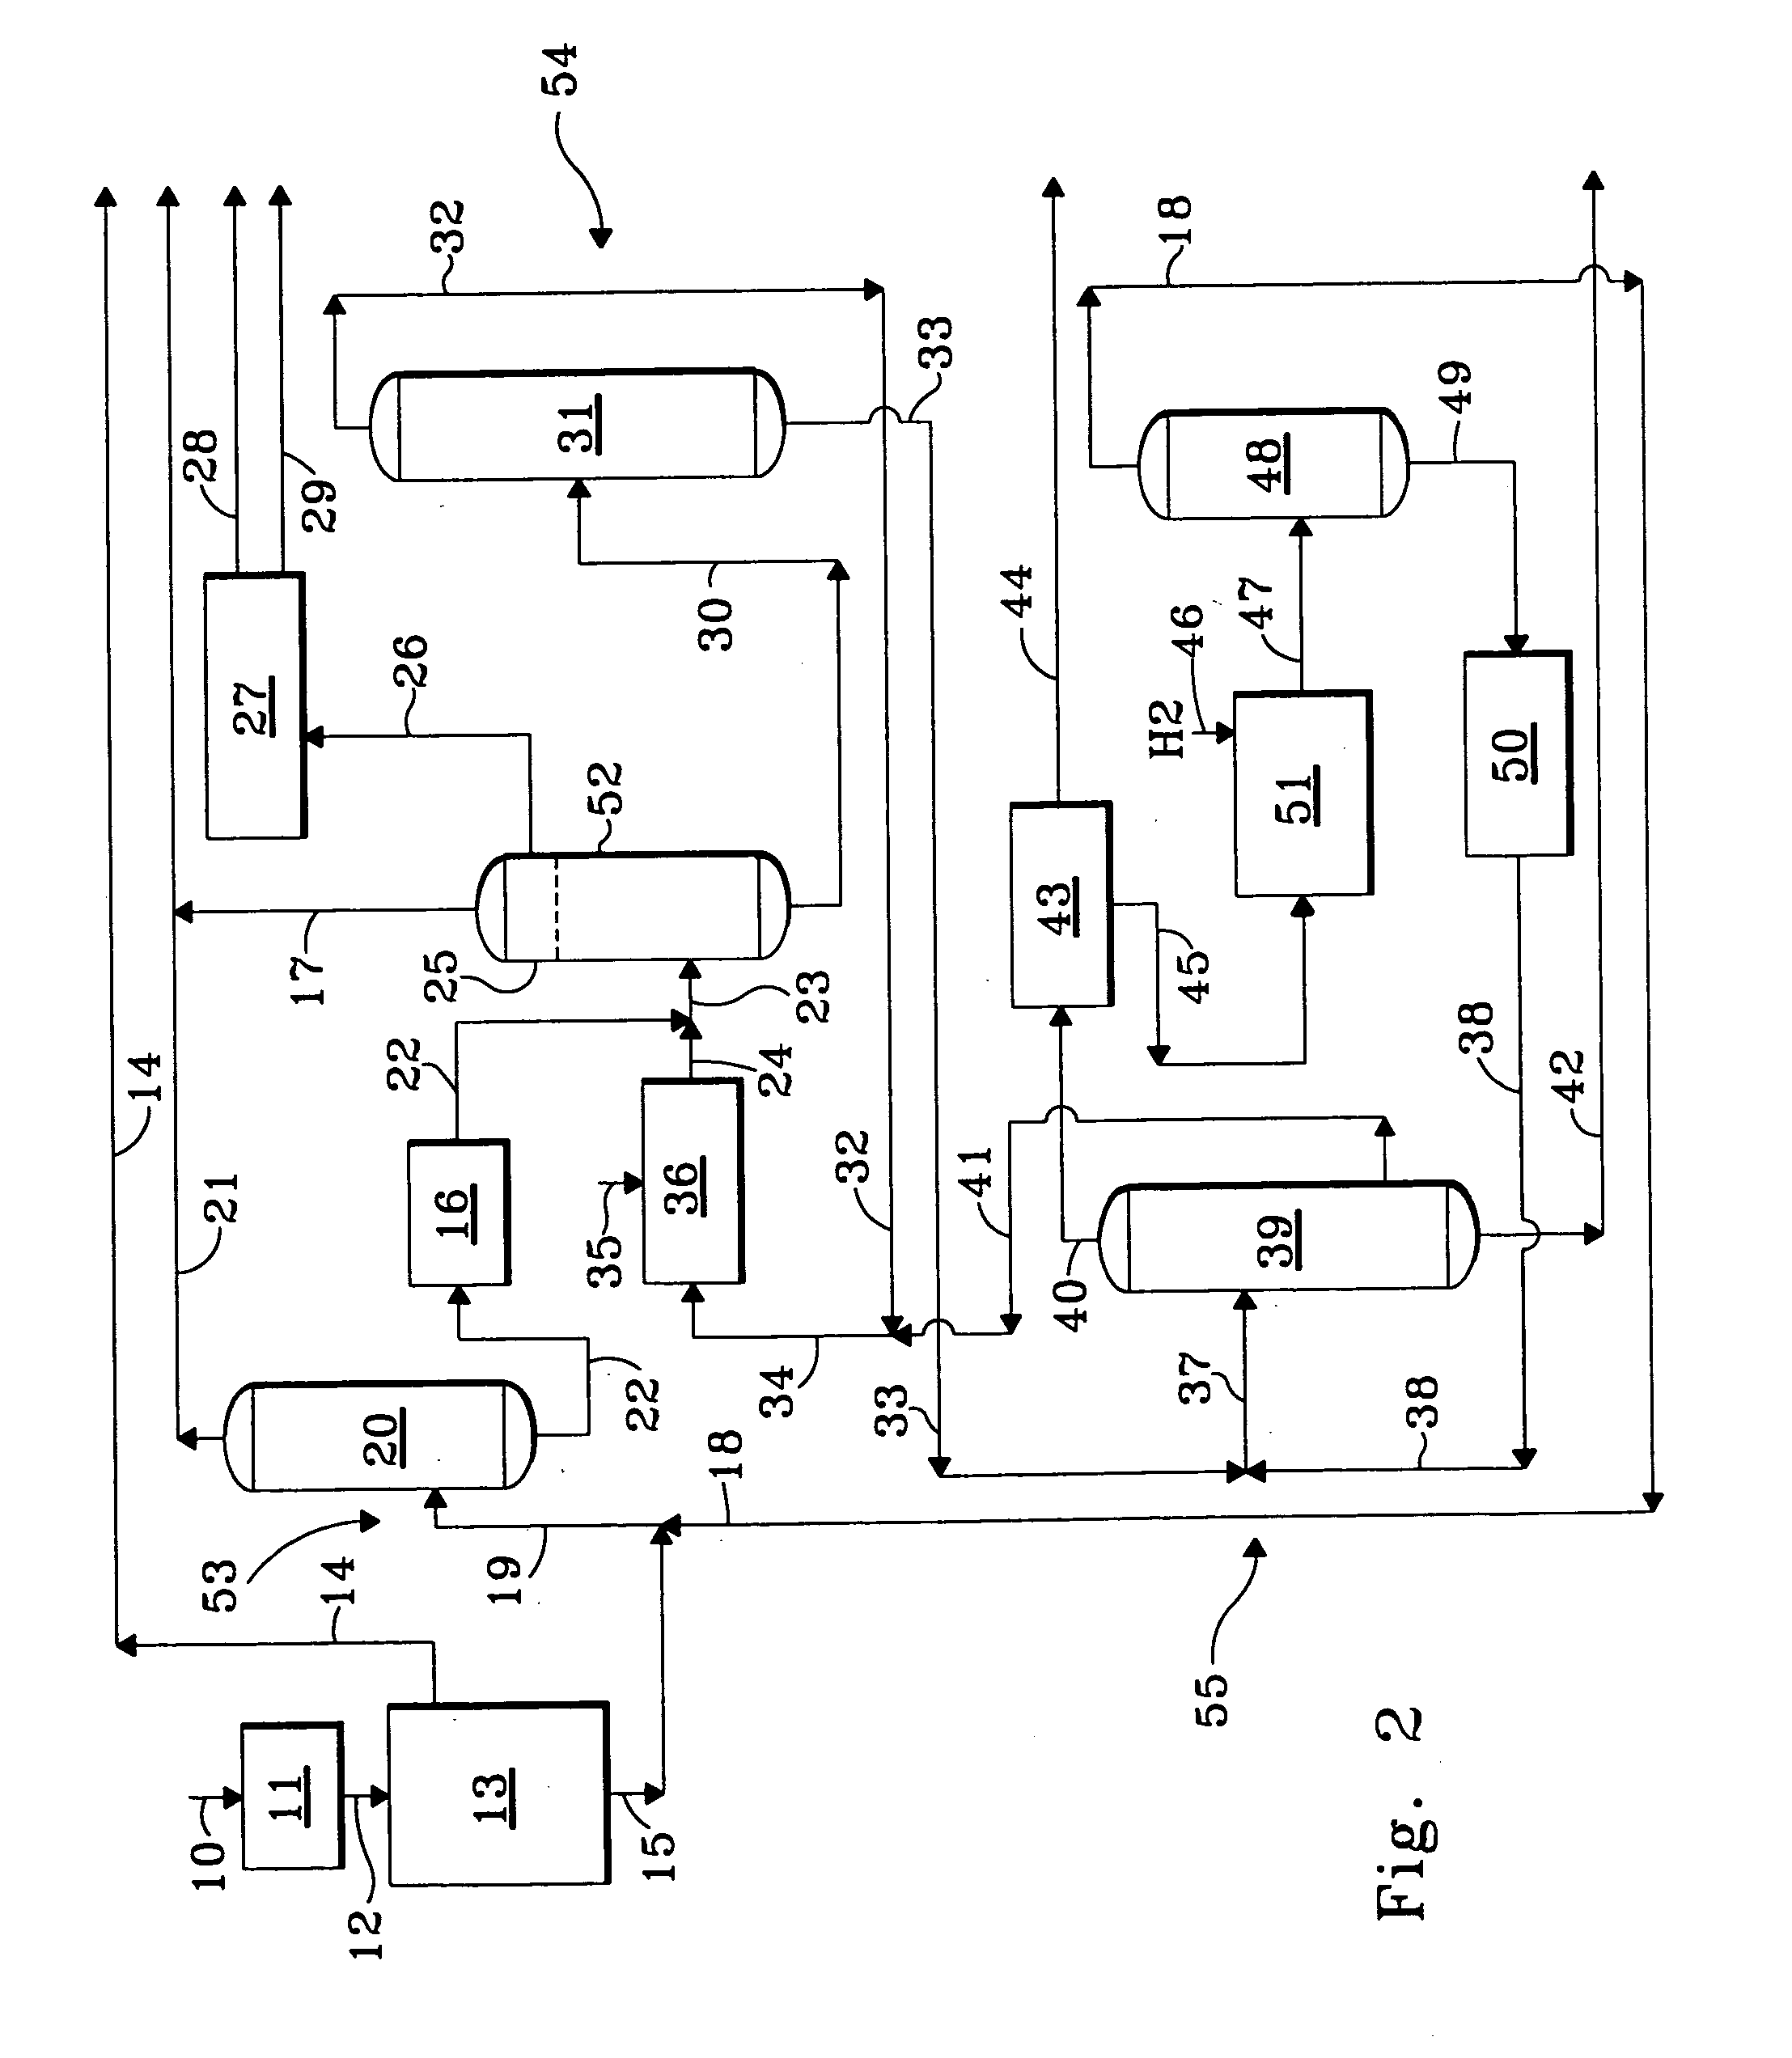 Integrated apparatus for aromatics production